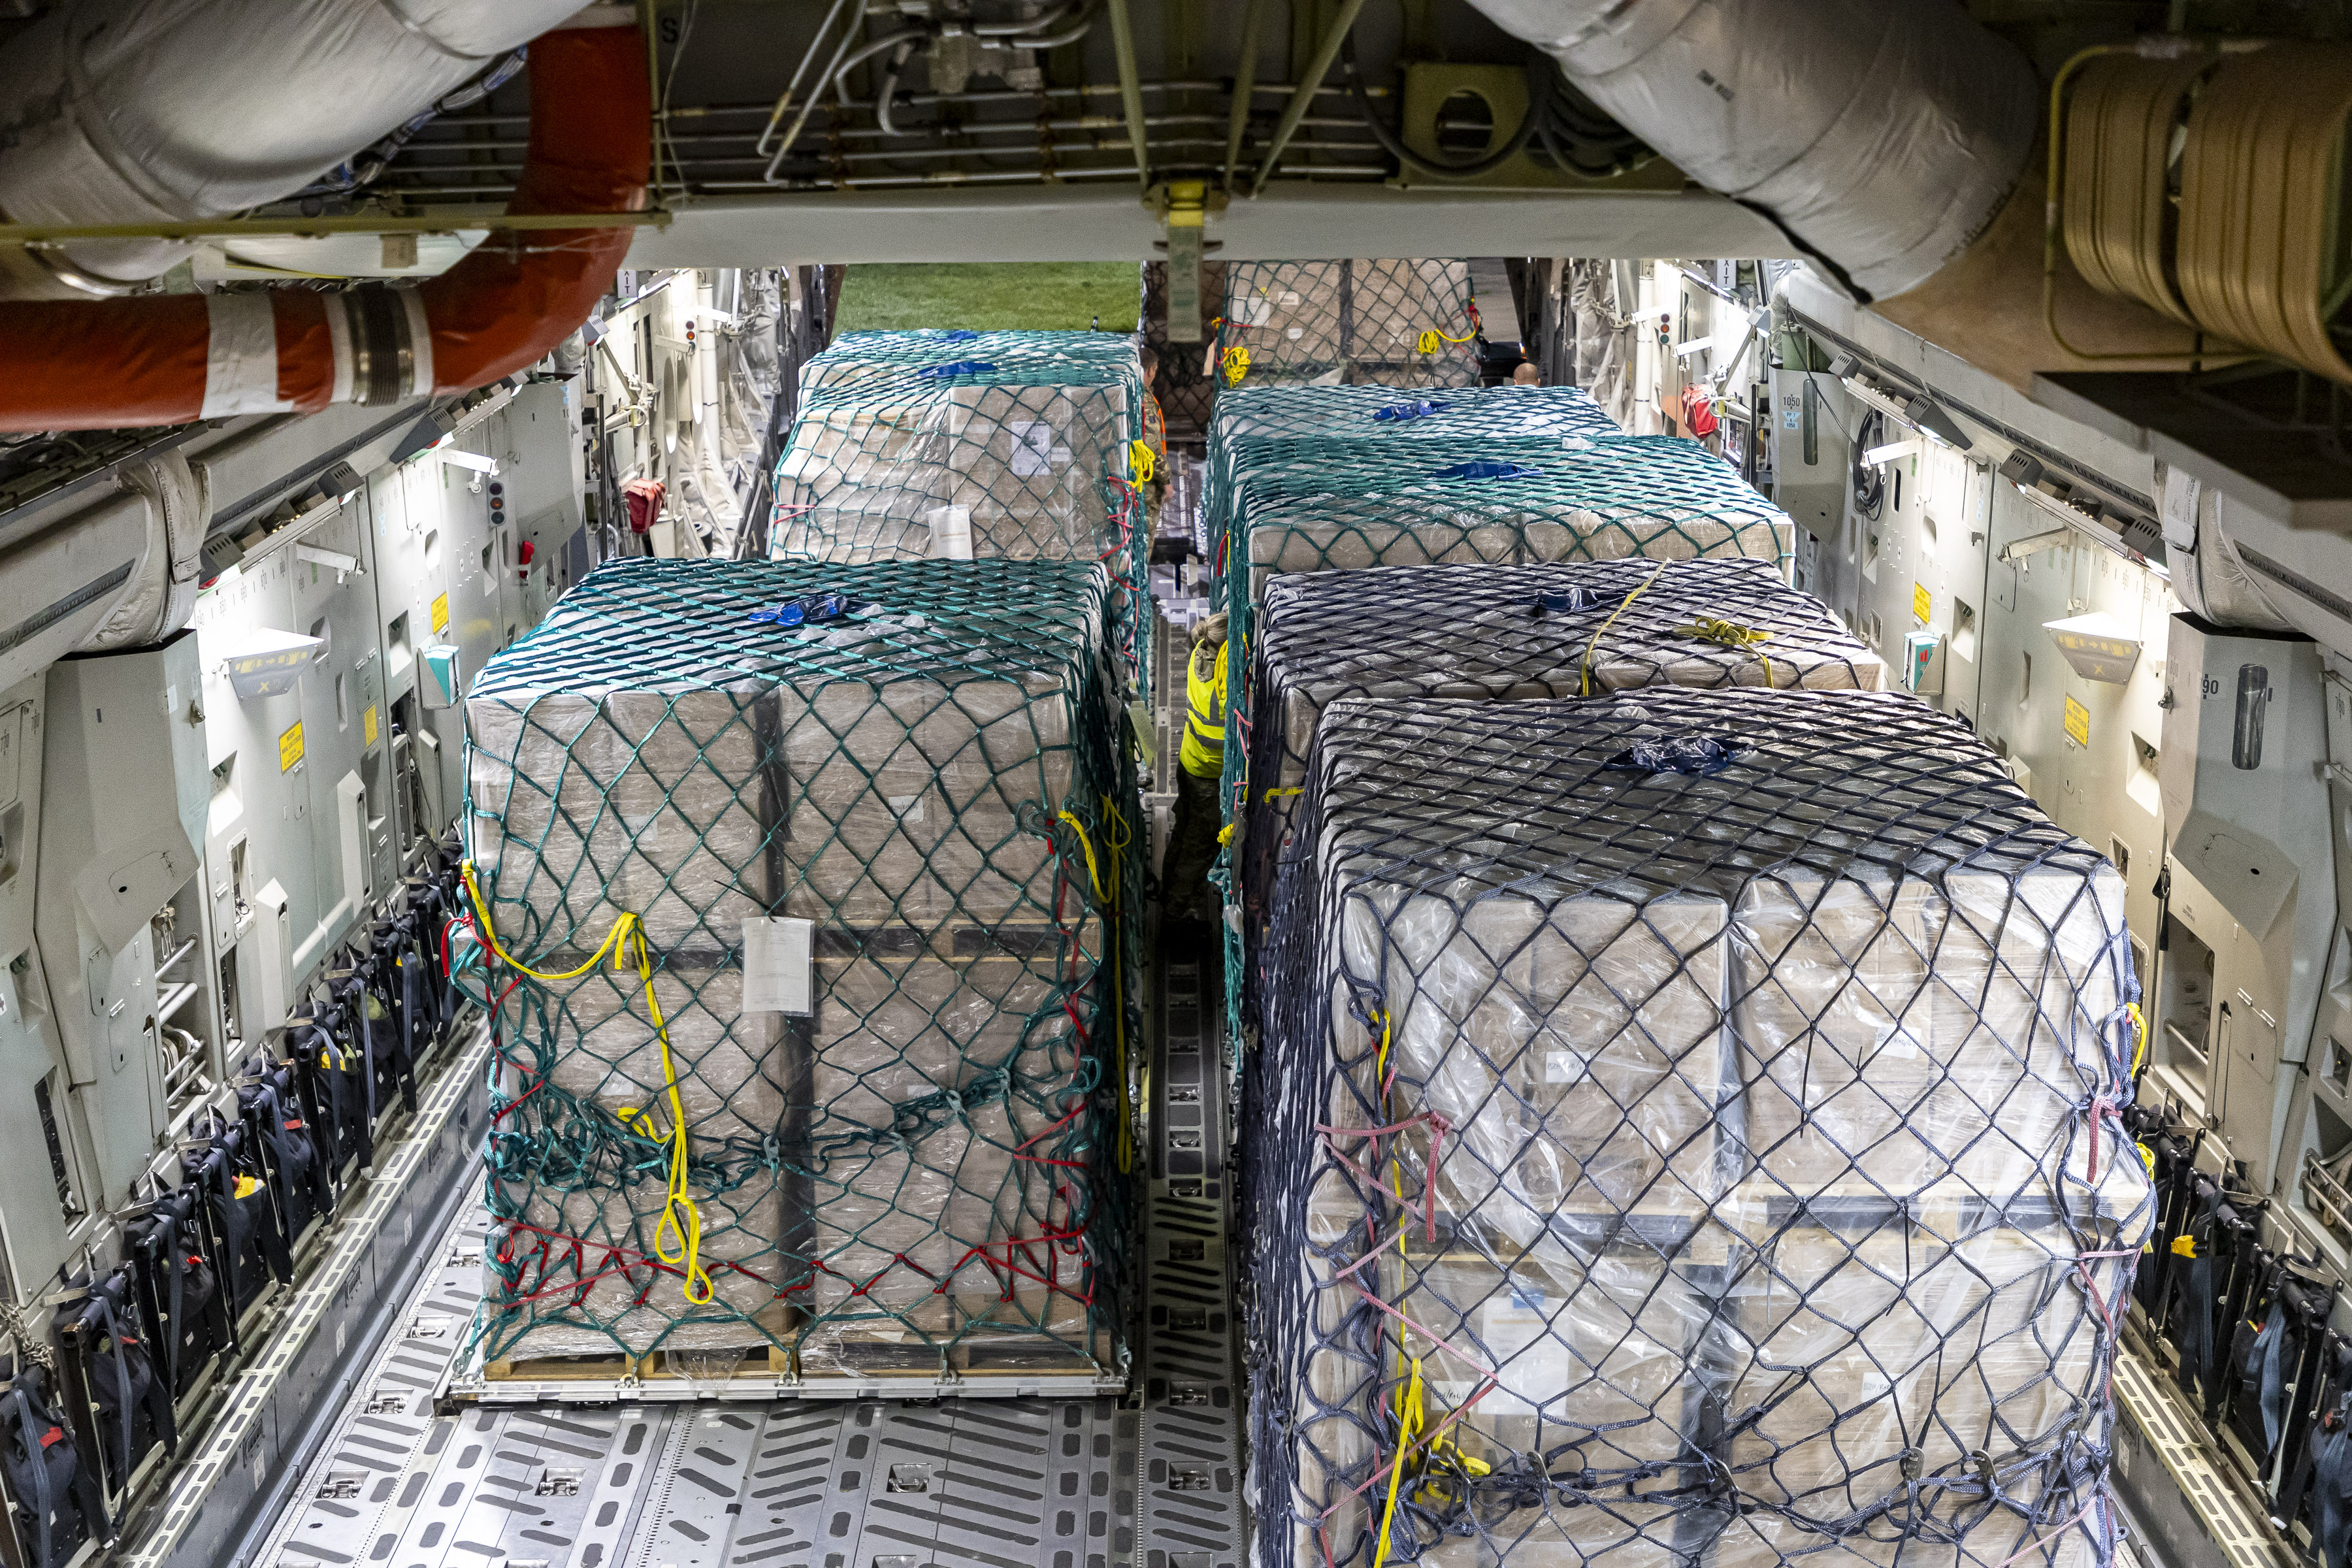 view from inside the C-17 of the supplies loaded and ready